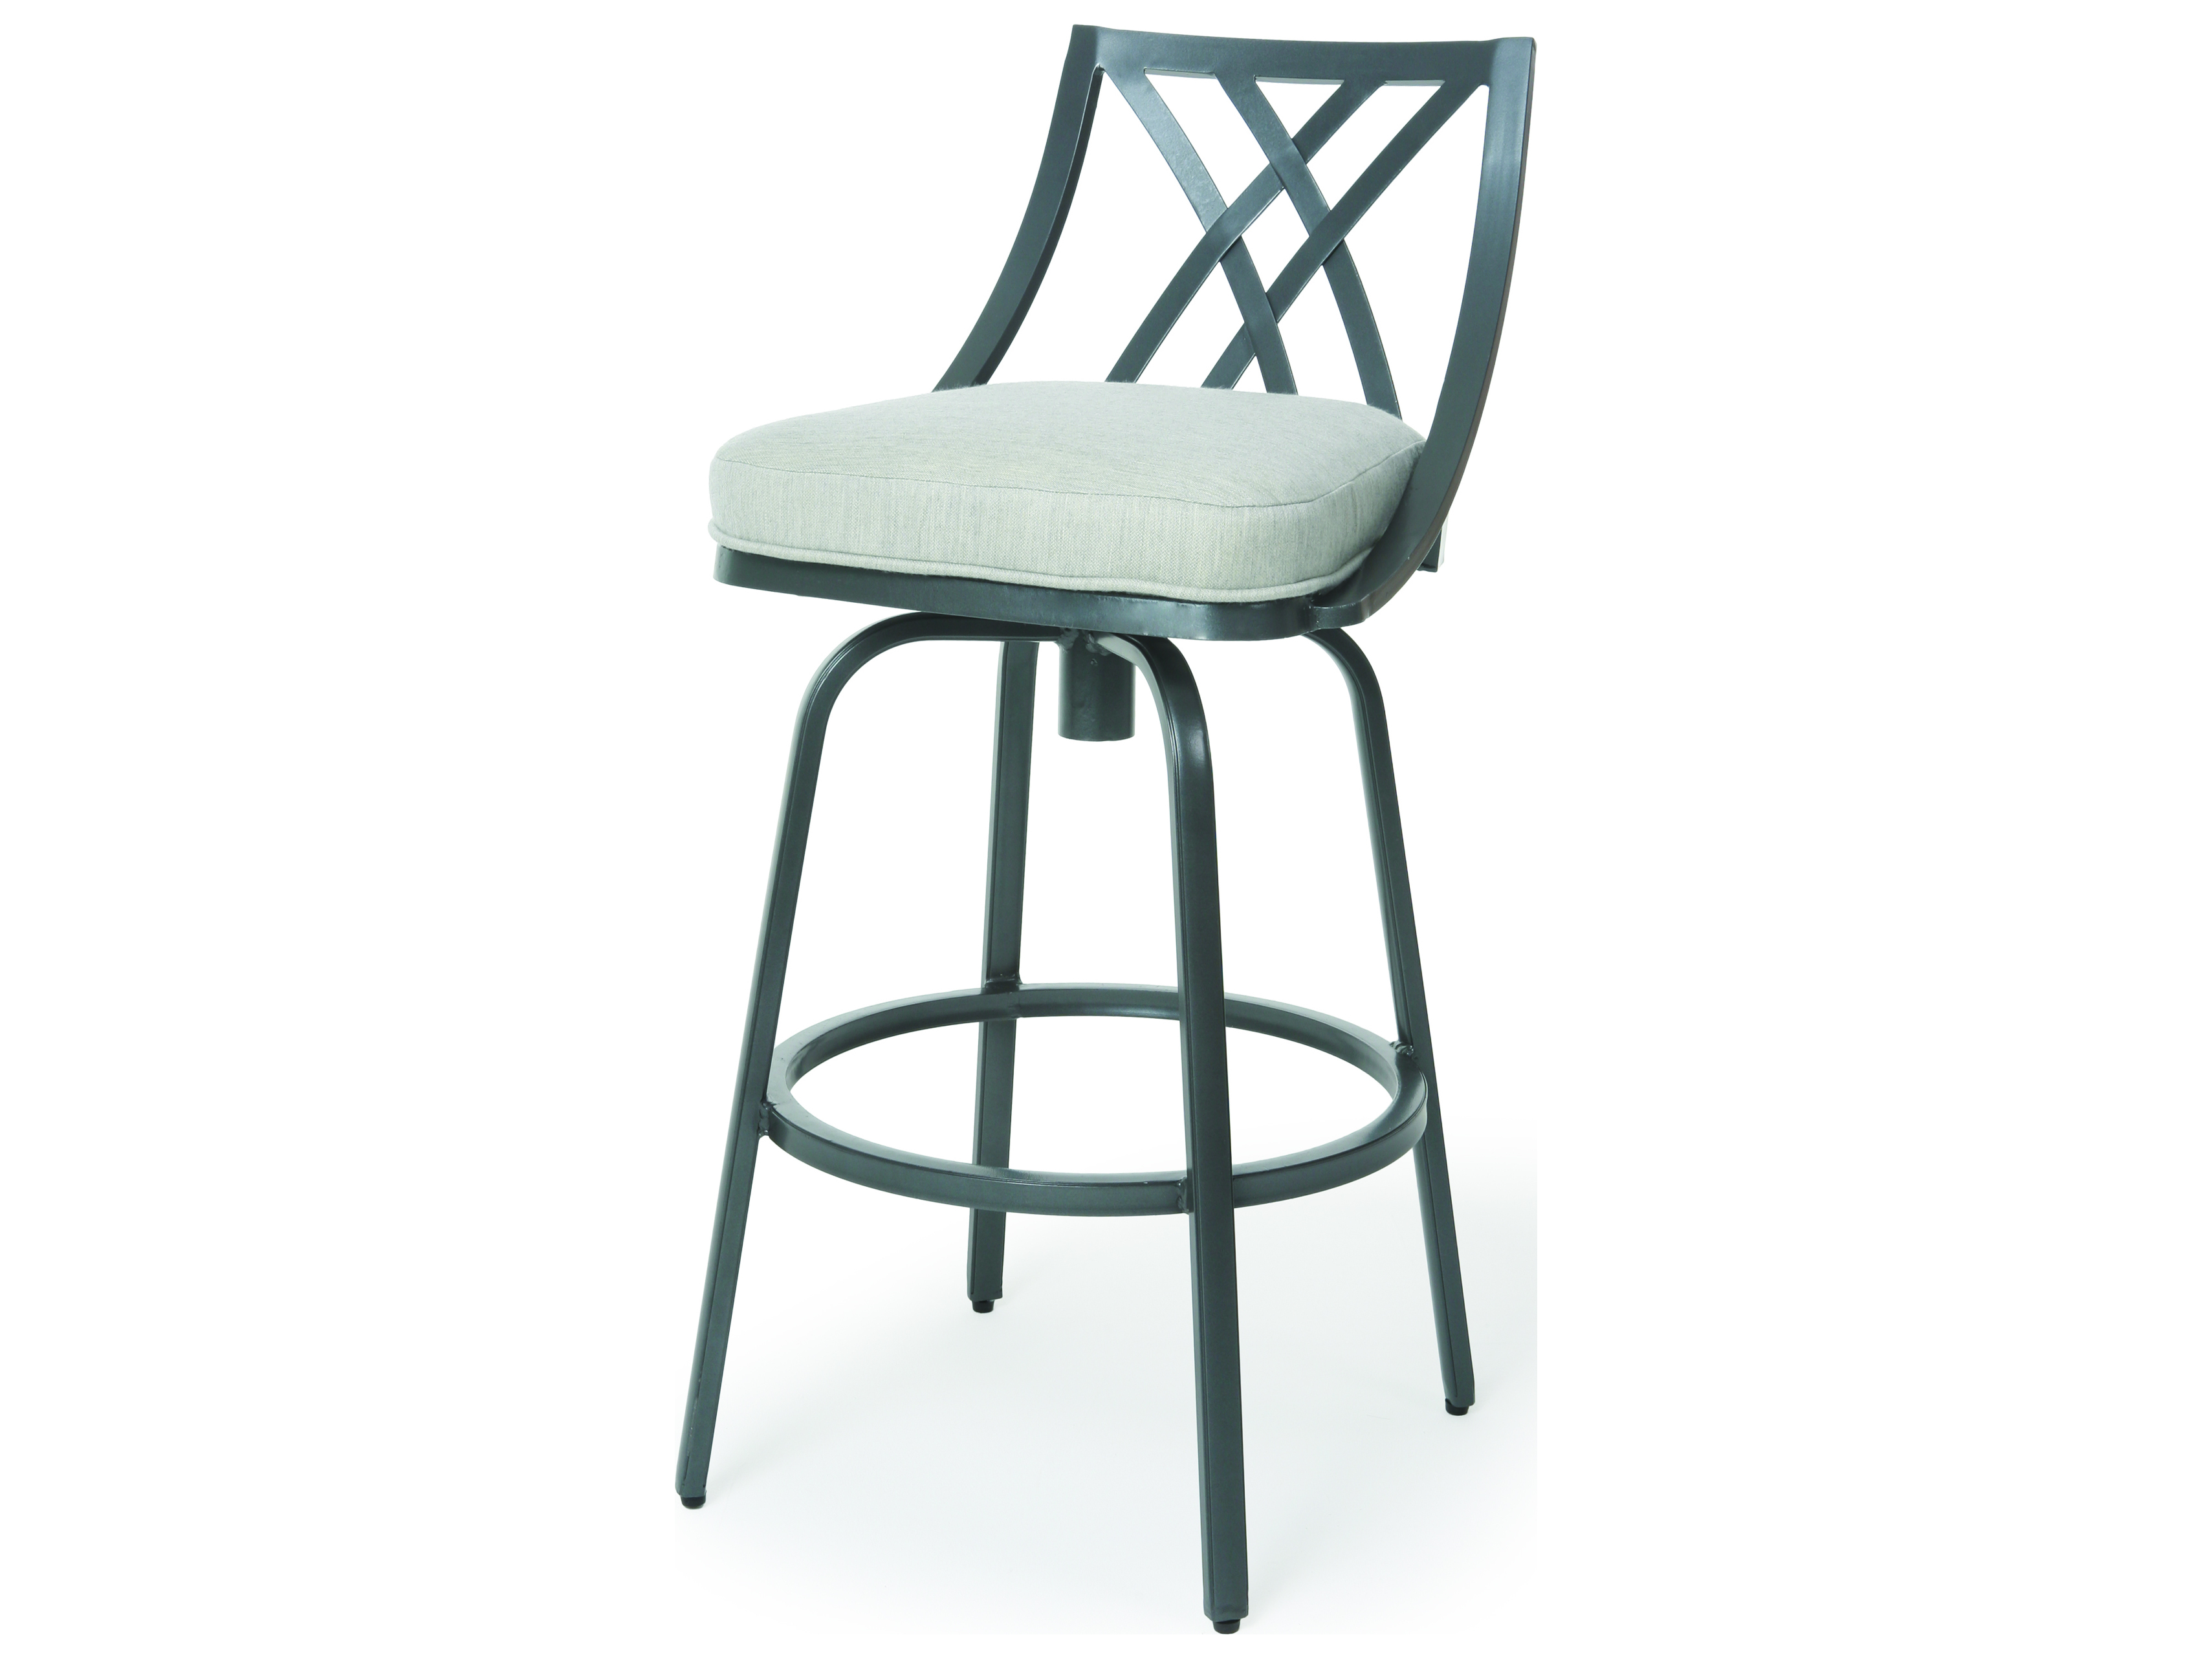 Mallin M Series Seat For Mb Stools, Trica Bar Stools Replacement Seats